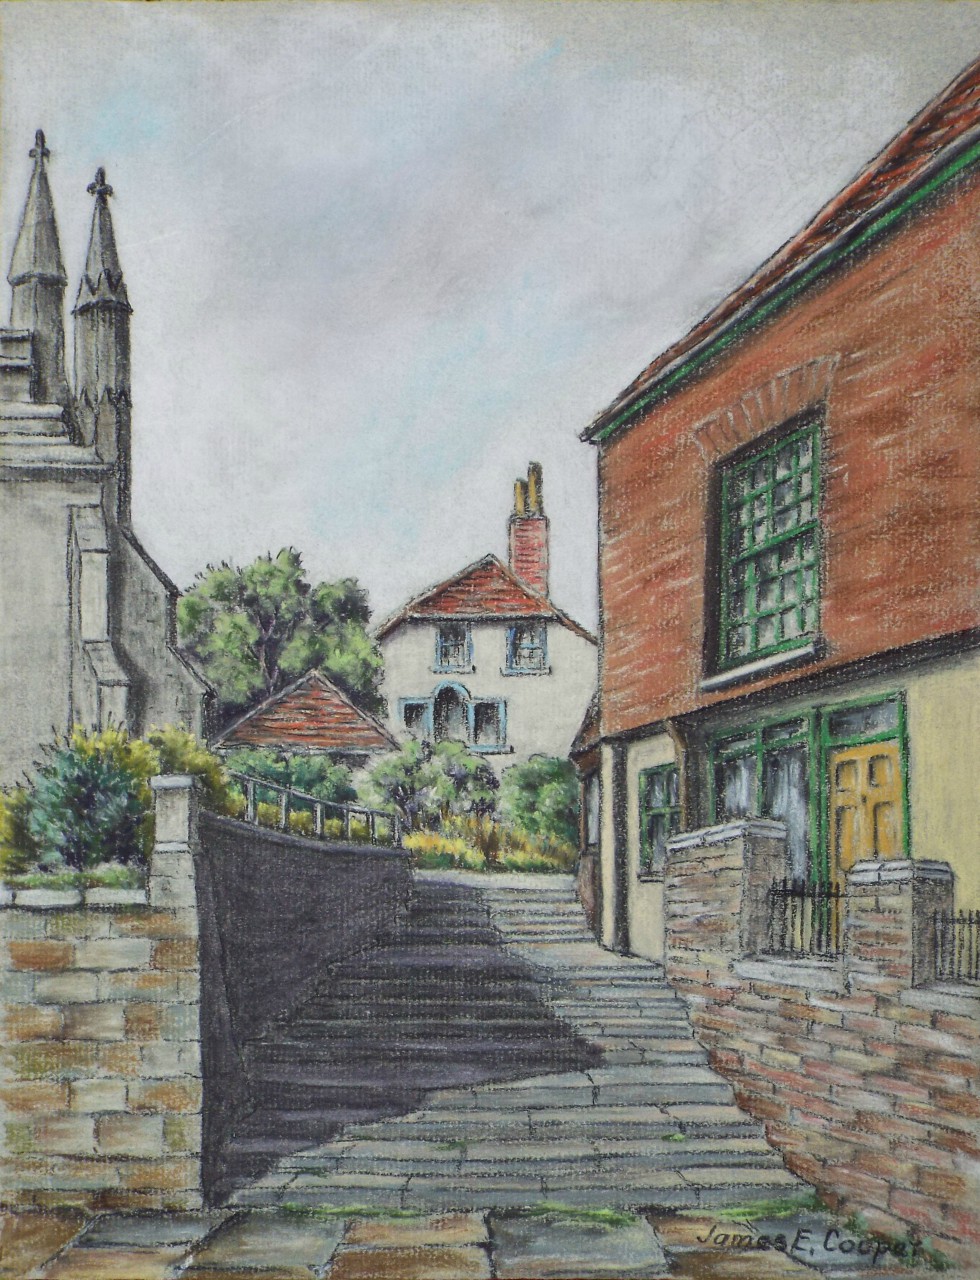 Watercolour and Pastel - The Steps of the Church, Frome